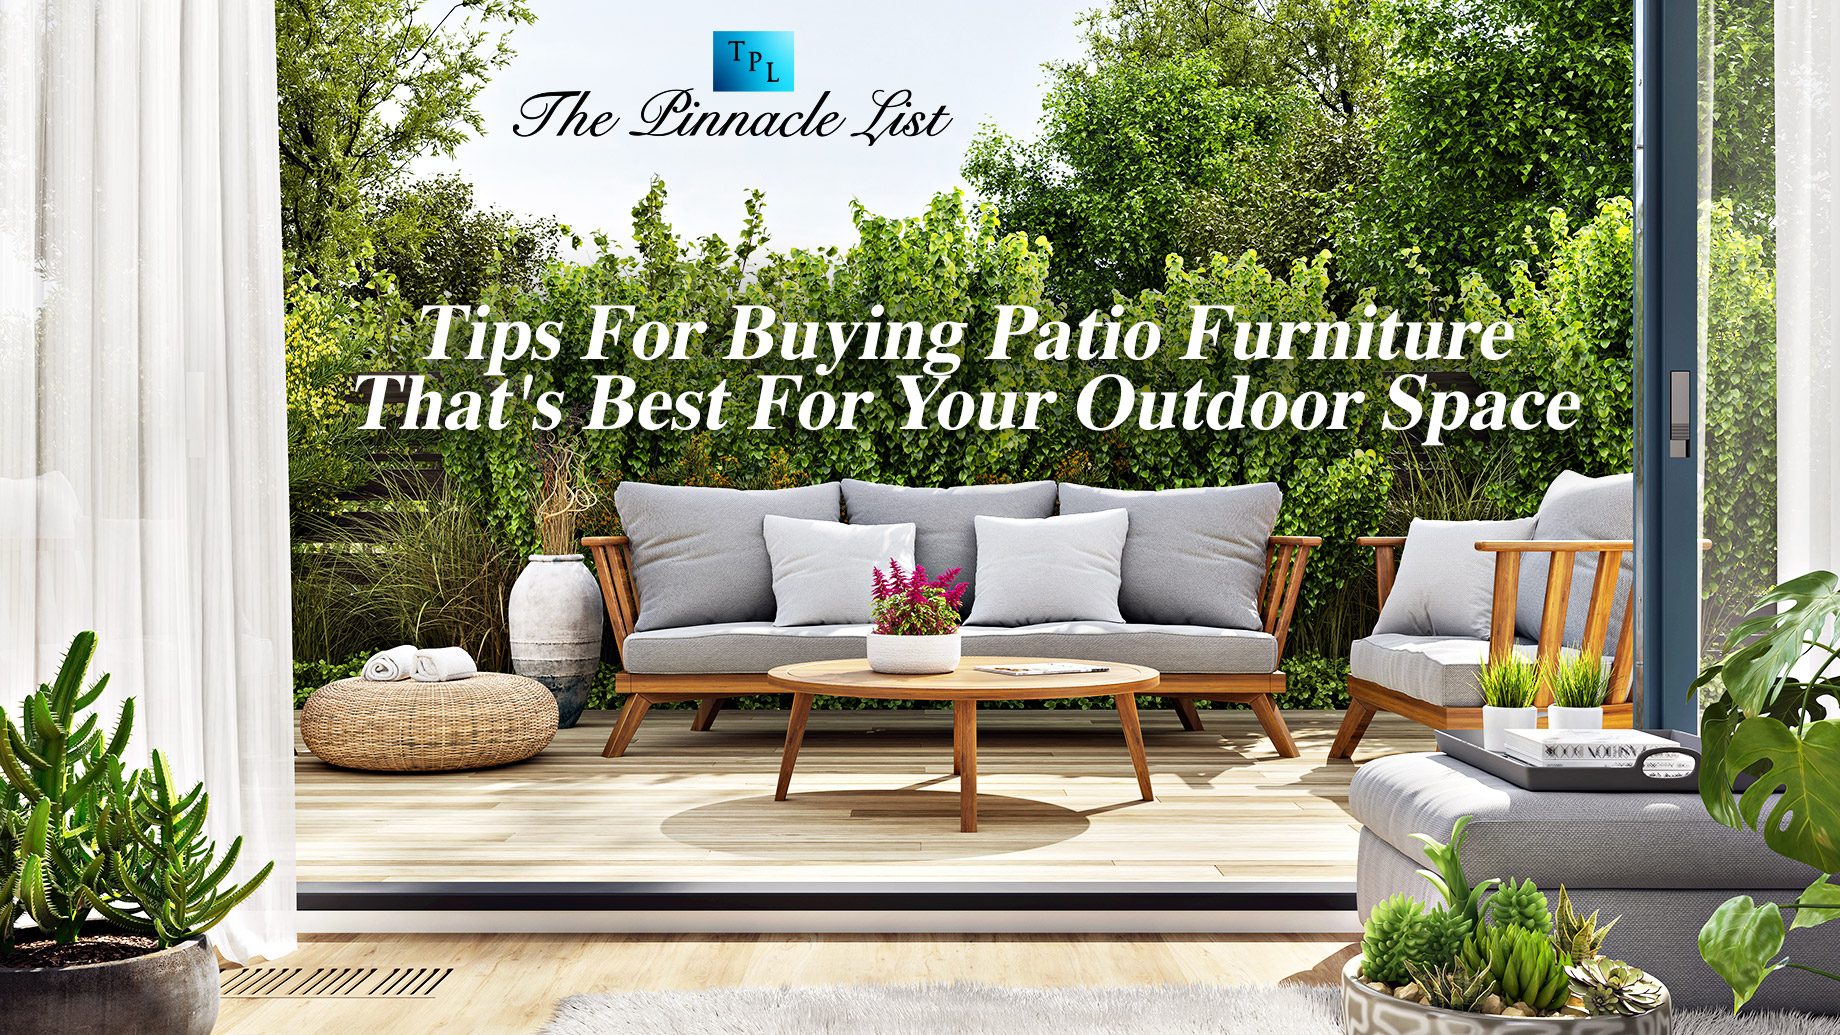 Tips For Buying Patio Furniture That's Best For Your Outdoor Space